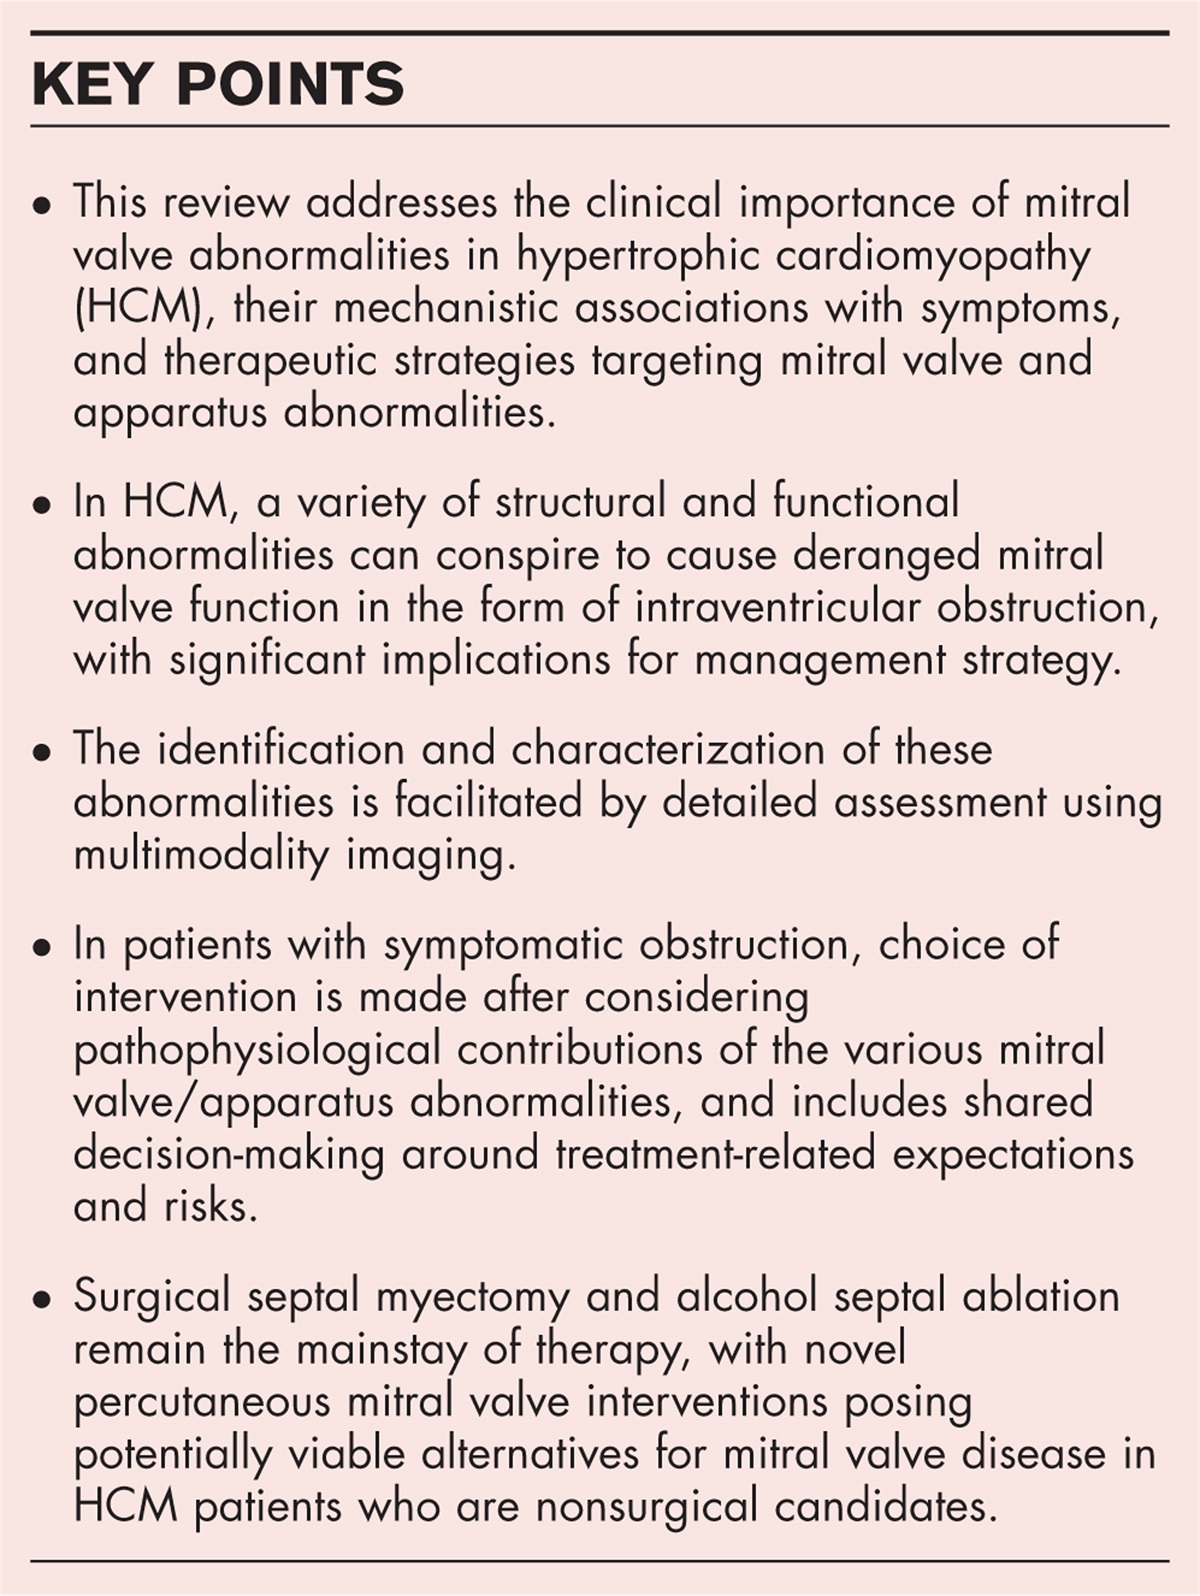 The mitral valve in hypertrophic cardiomyopathy